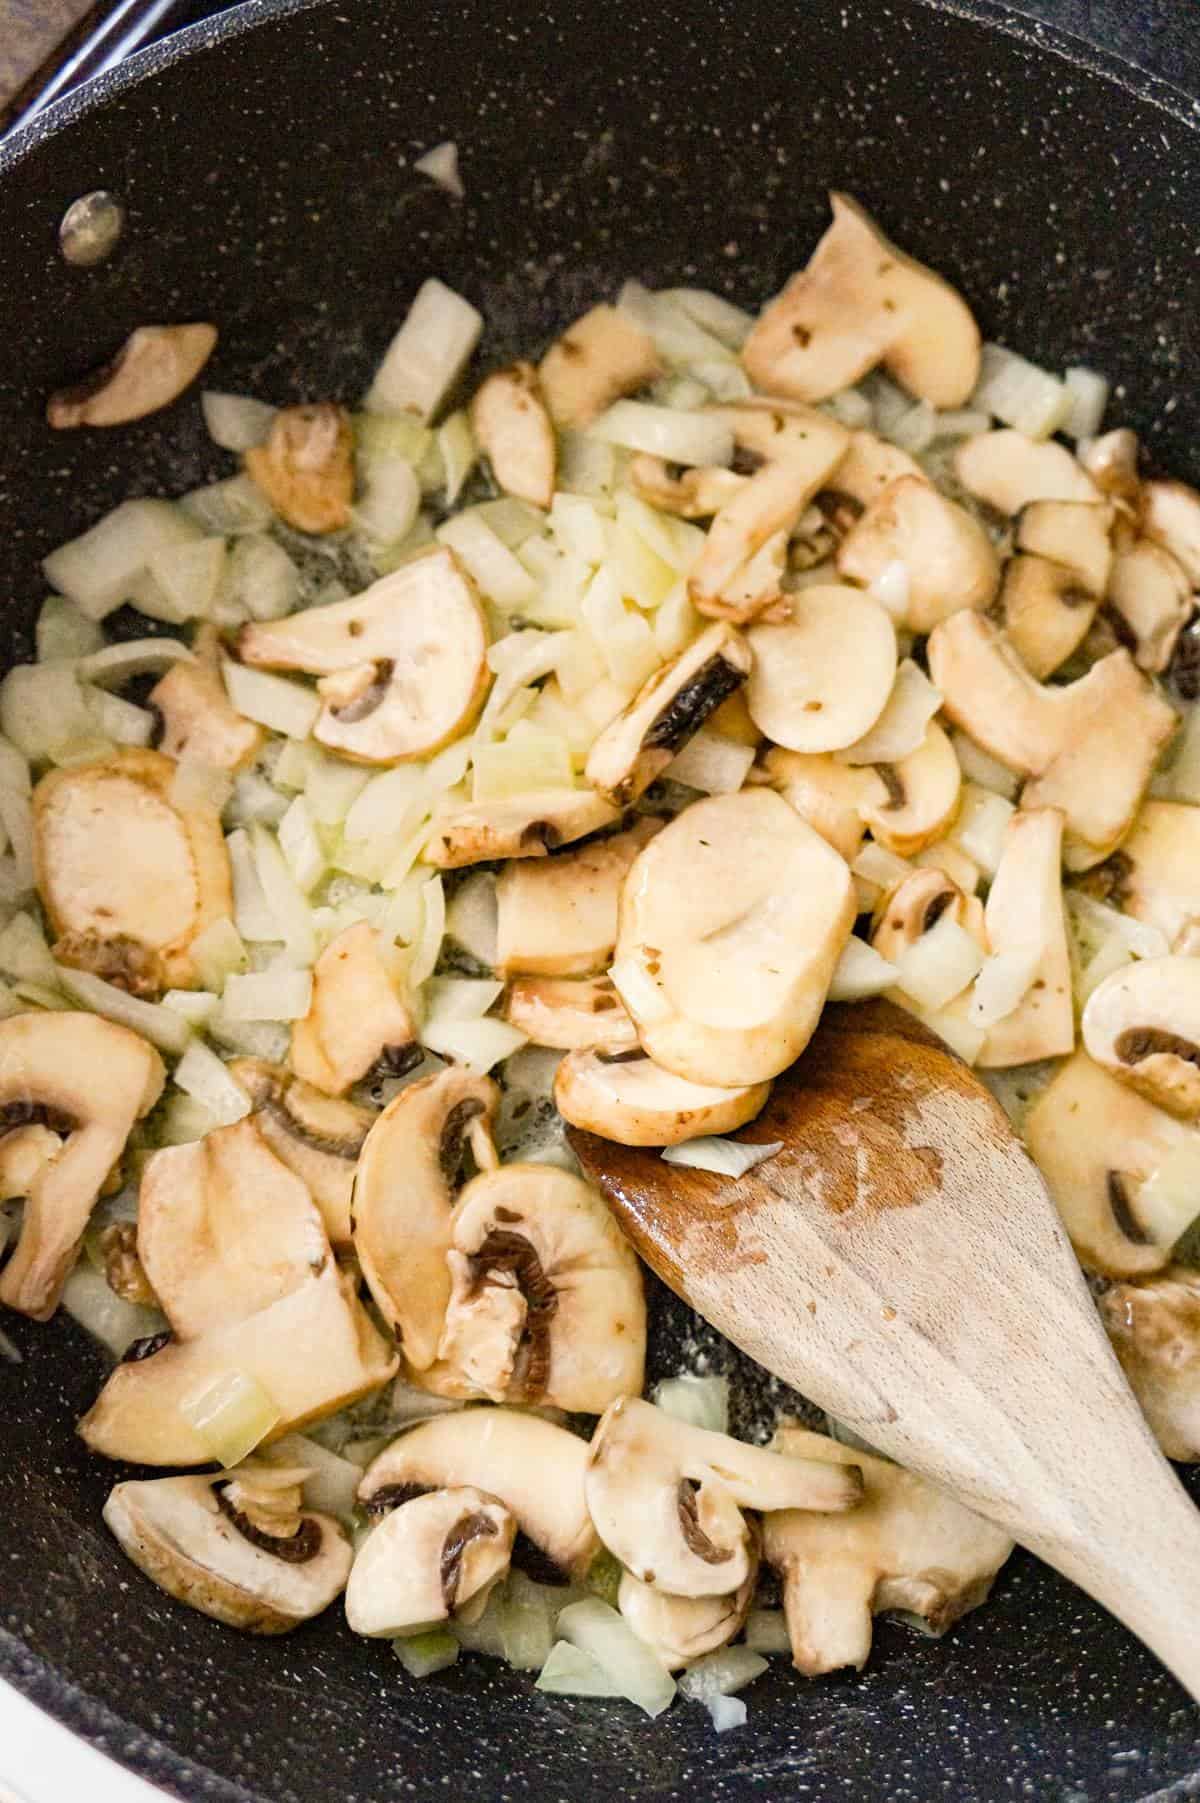 sliced mushrooms and diced onions cooking in a saute pan